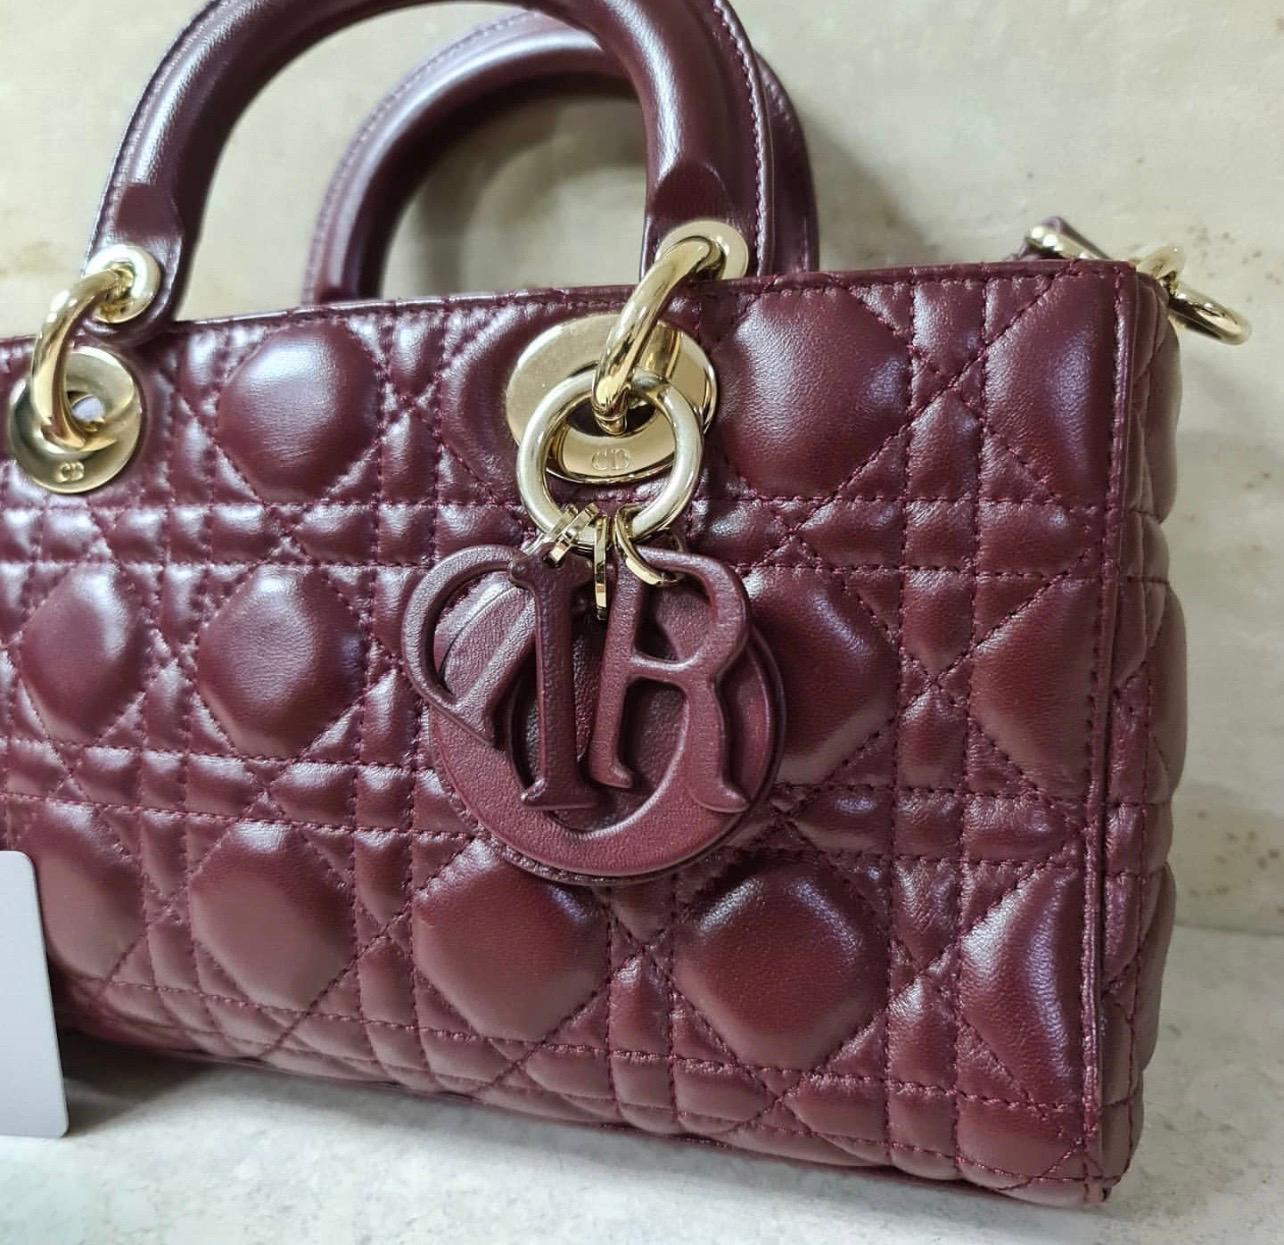 From fall/winter 2016

Lady Dior in rectangular shape.

26*14*5 cm

Very good condition.

Authenticity card included.

No original packaging.